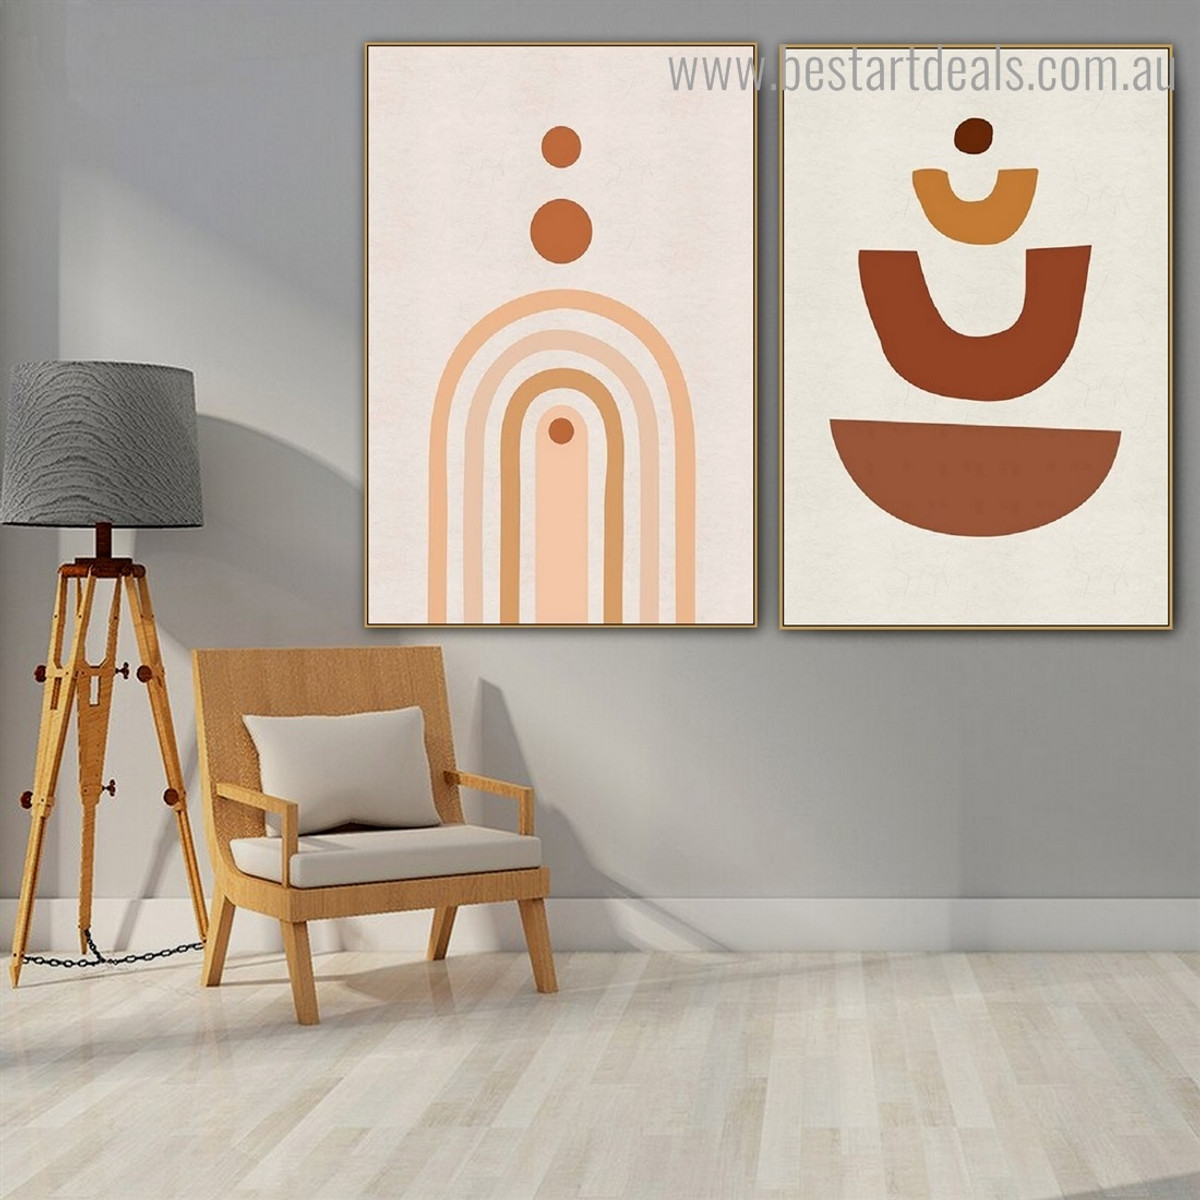 Spiral Lines Abstract Contemporary Framed Portraiture Image Canvas Print for Room Wall Drape